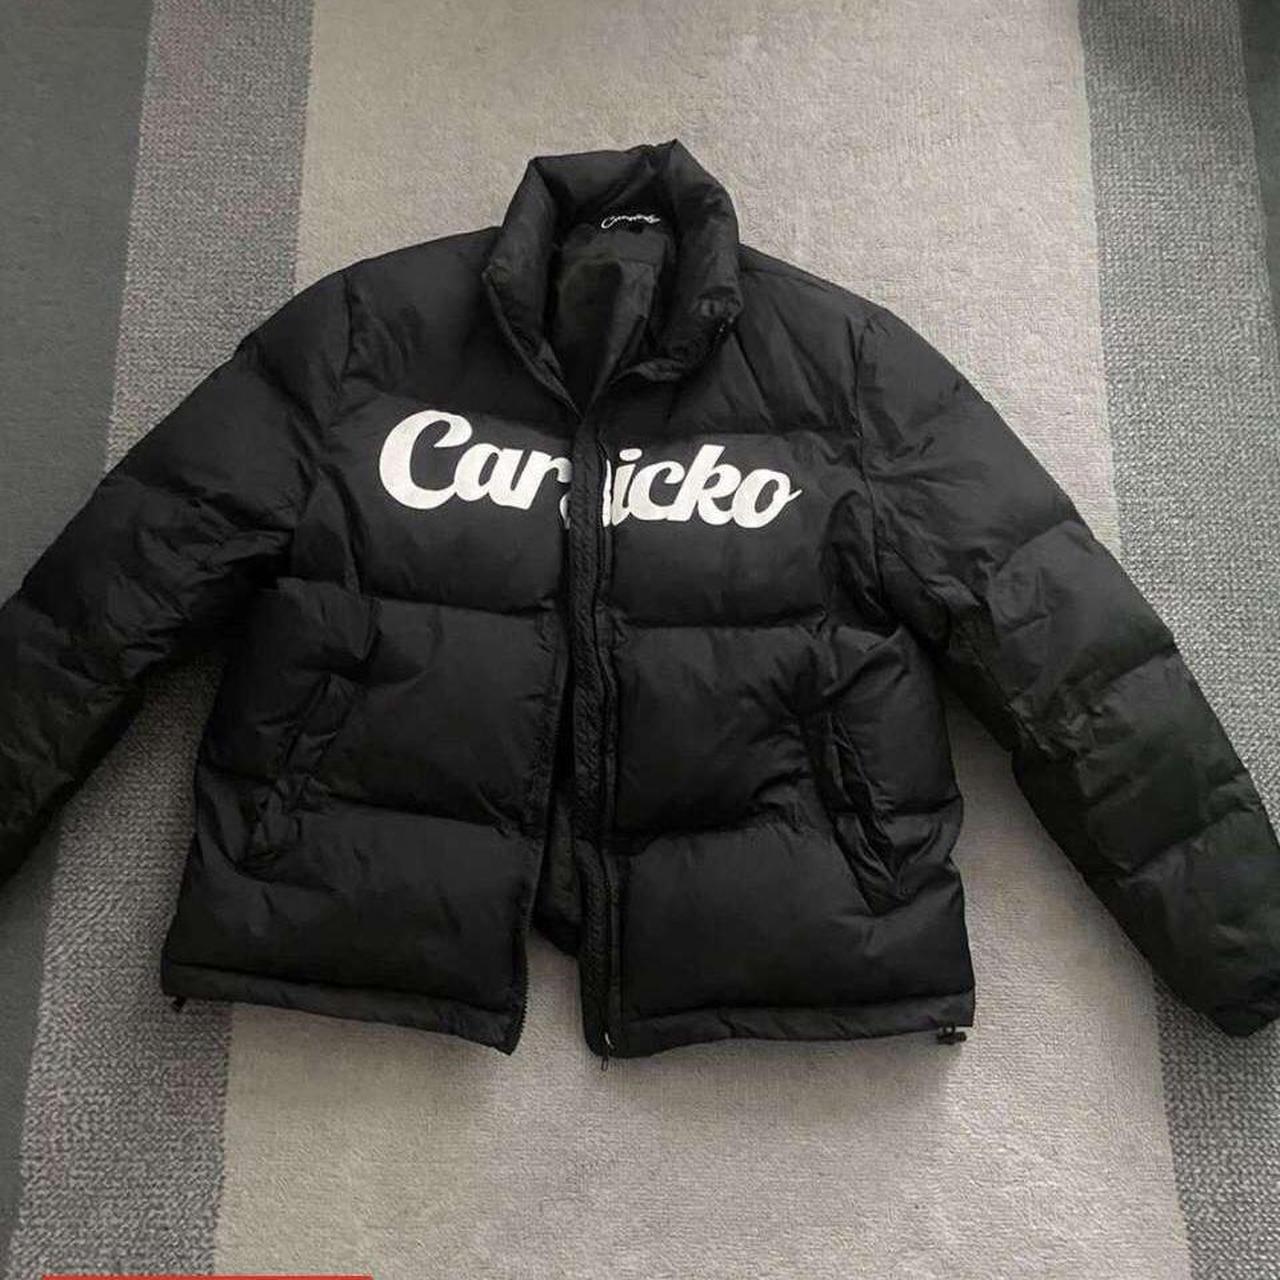 Carsicko Jacket (Black). Brand New / Authentic. Can... - Depop